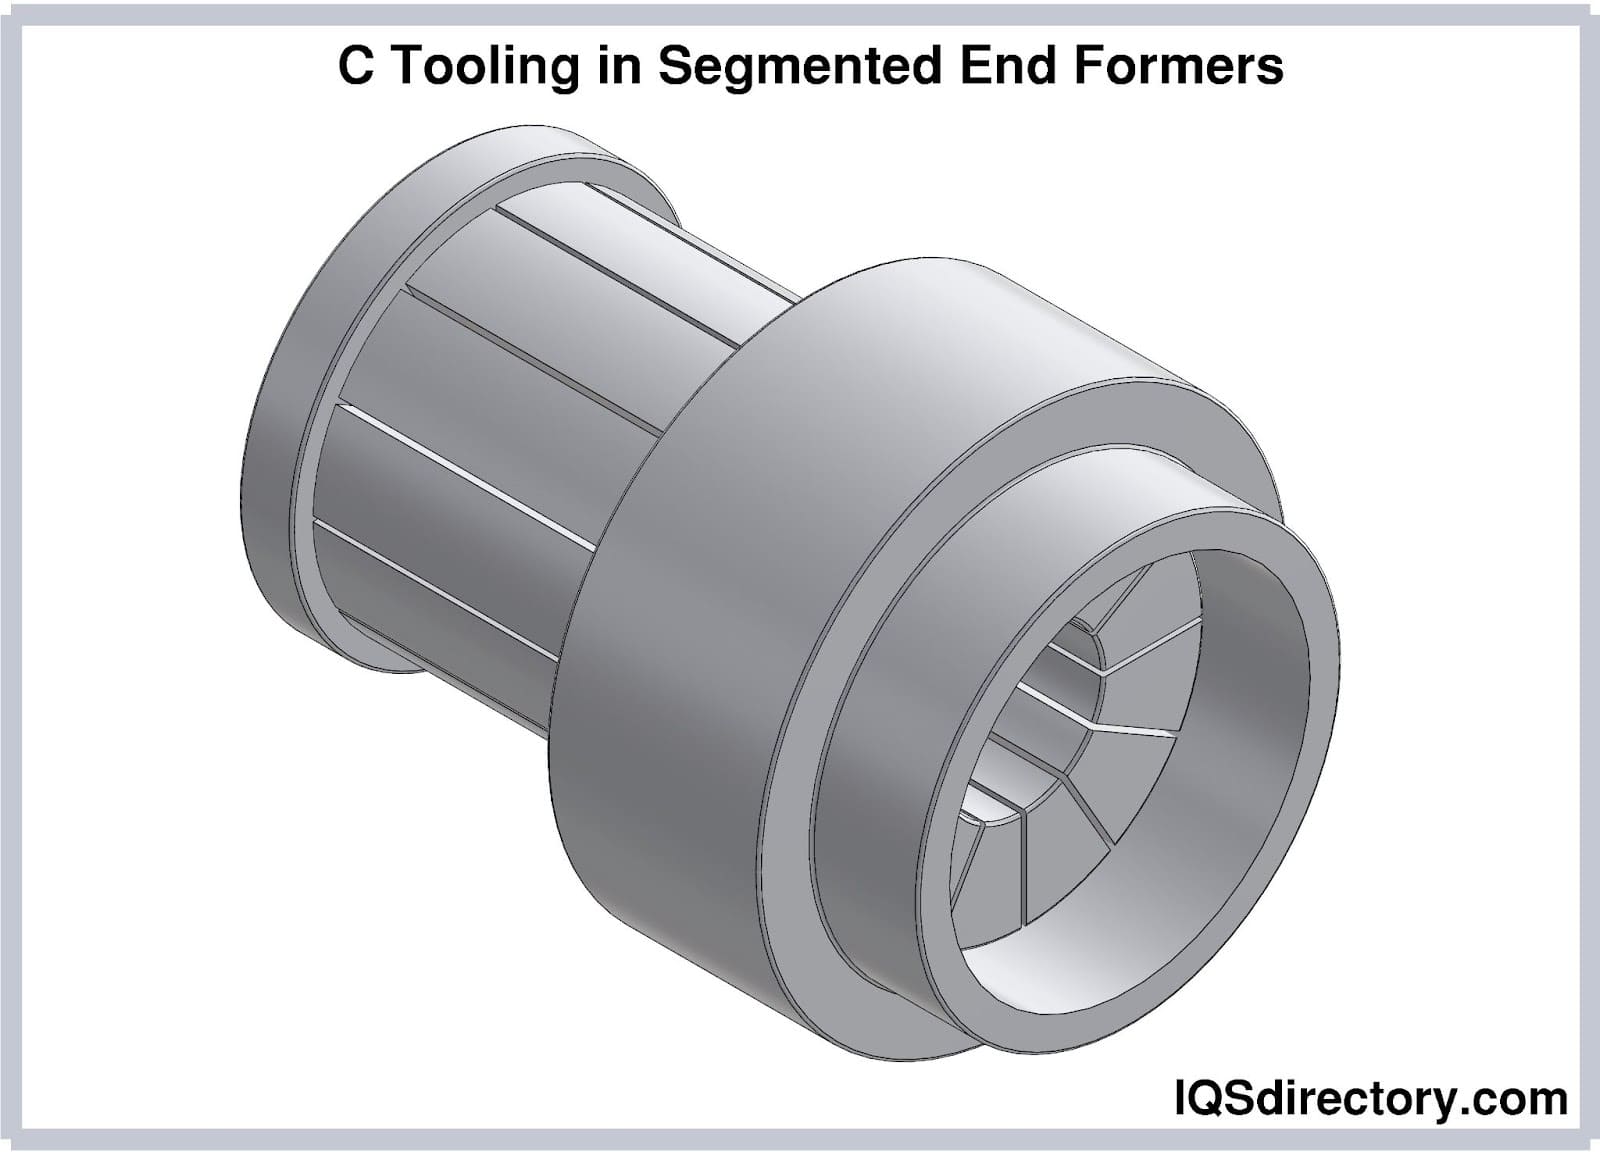 C Tooling in Segmented End Formers